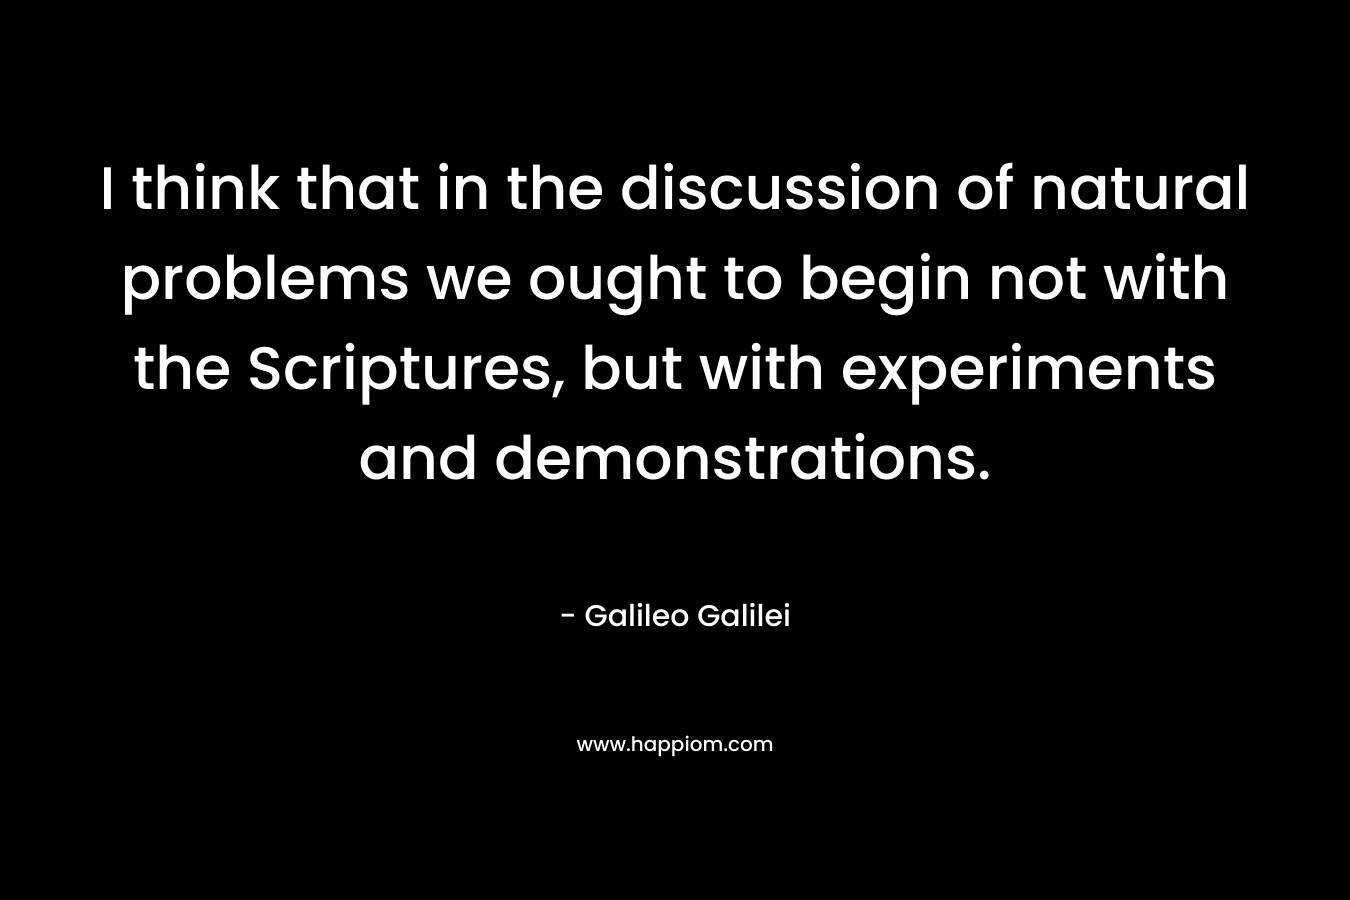 I think that in the discussion of natural problems we ought to begin not with the Scriptures, but with experiments and demonstrations. – Galileo Galilei